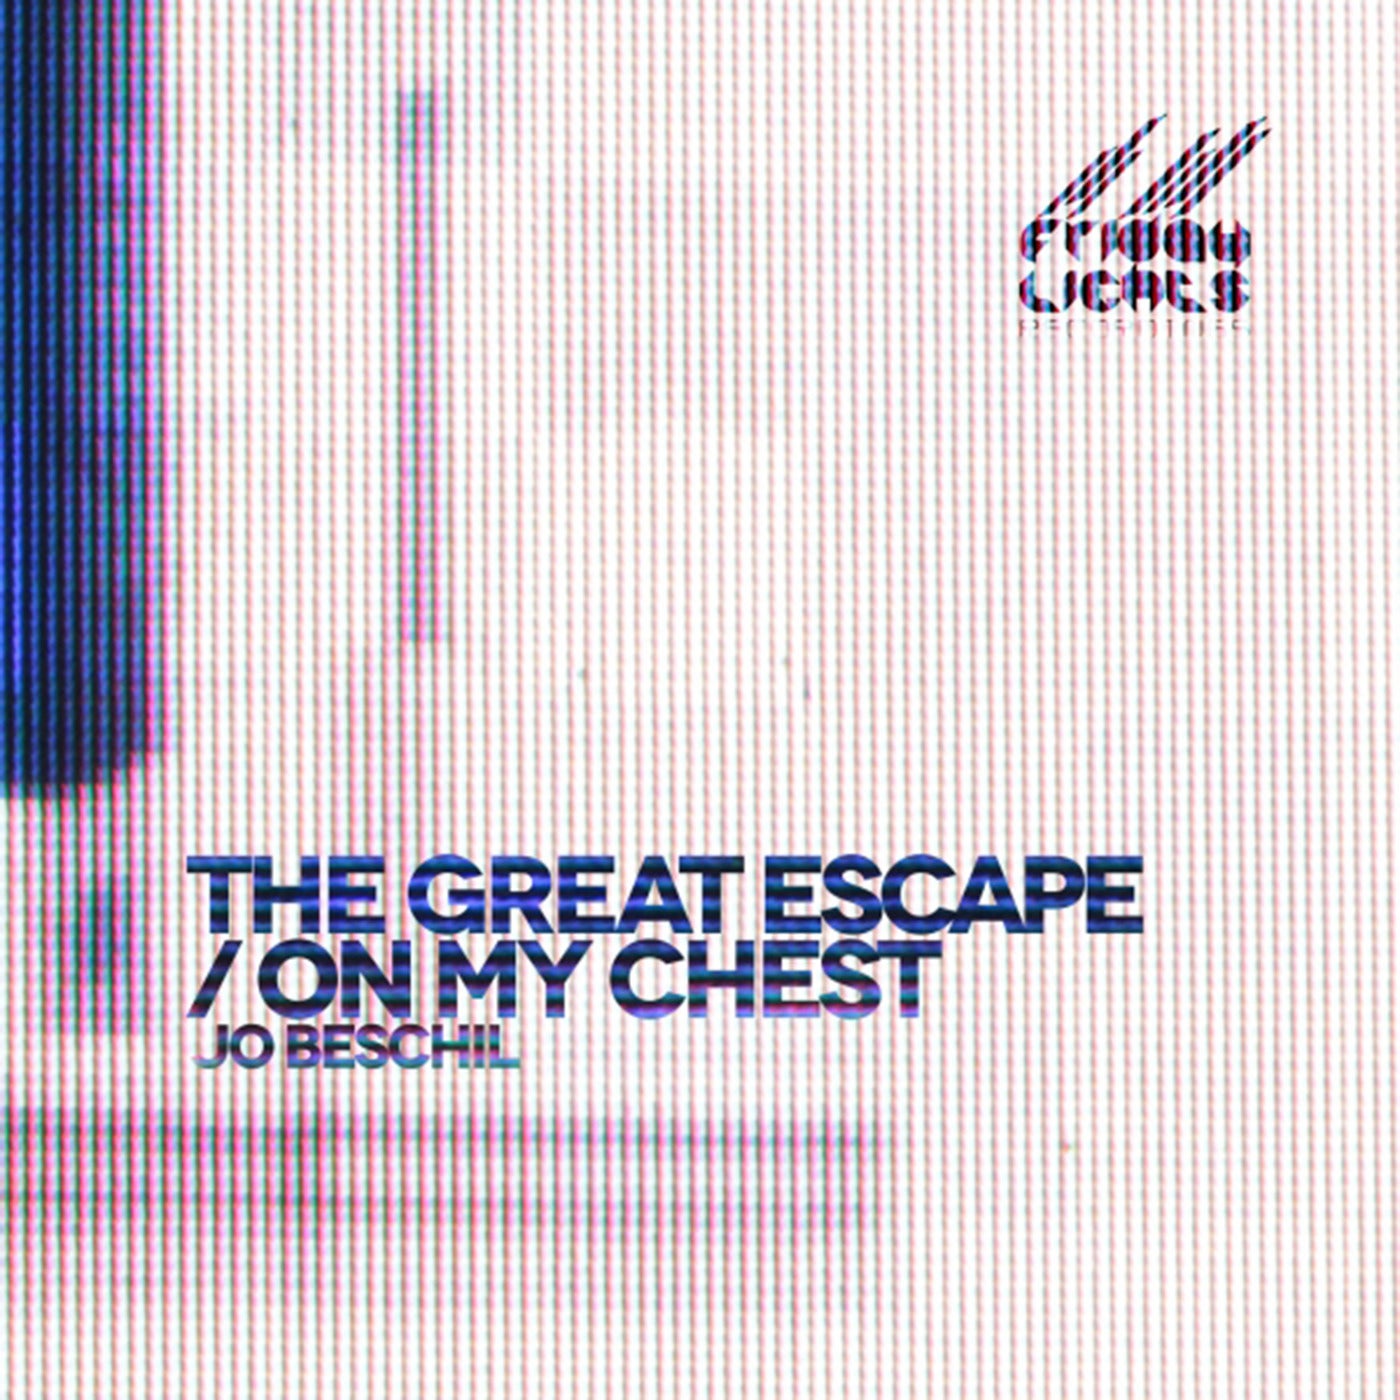 On My Chest / The Great Escape